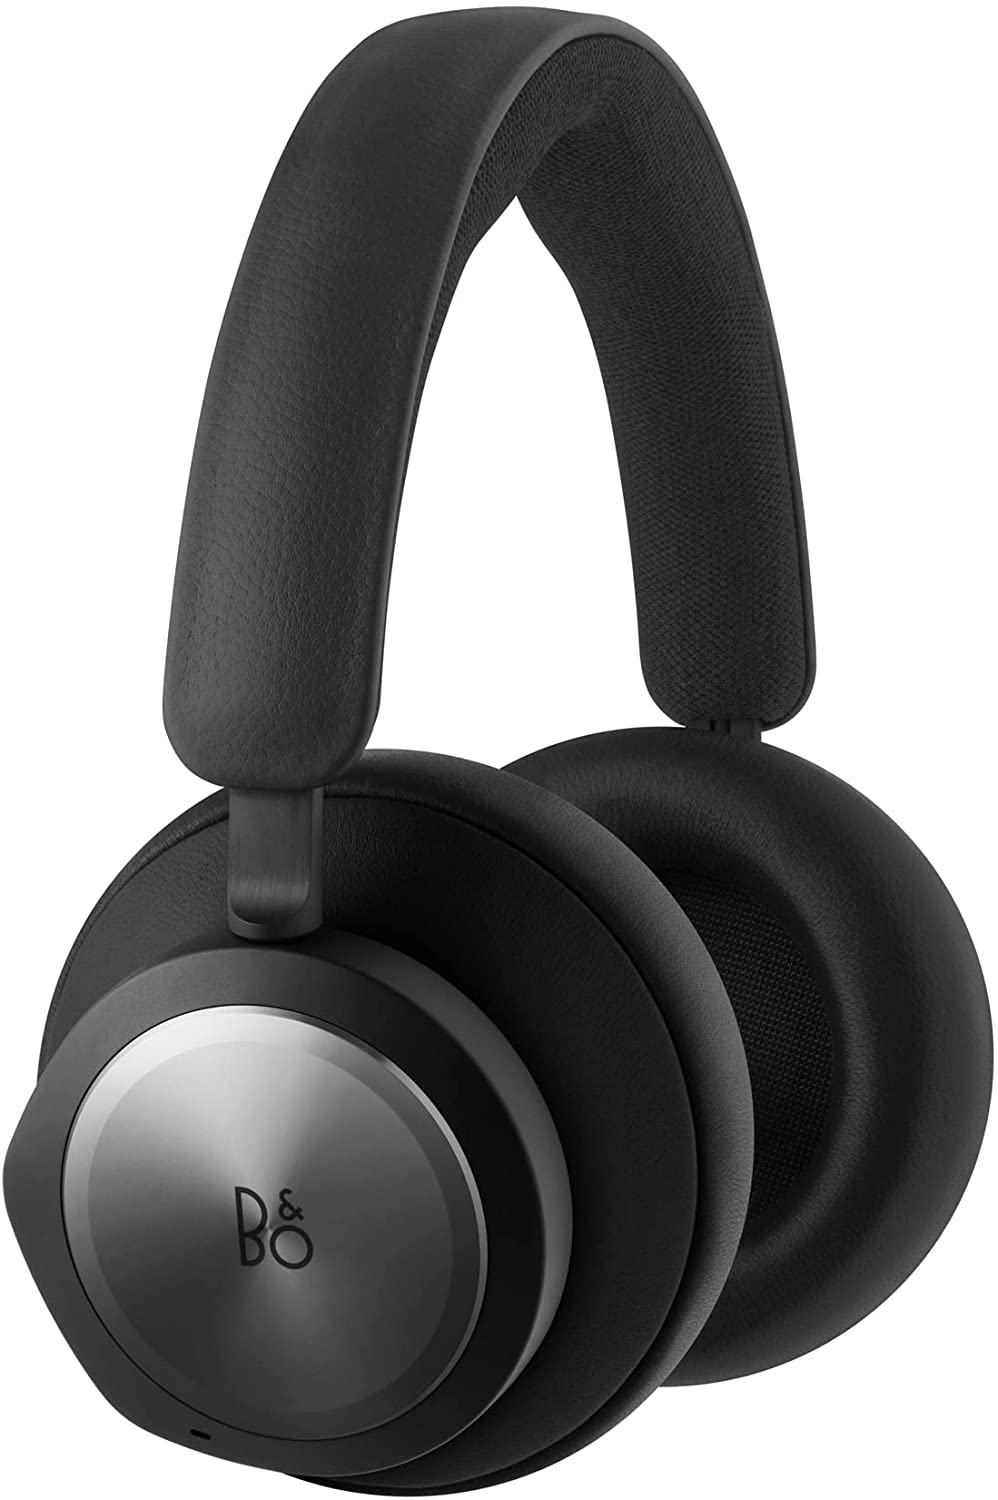 Bang & Olufsen Beoplay Portal Gaming Headset - Comfortable Wireless Noise Cancelling Gaming headphones for Xbox Series X|S, Xbox One - $200